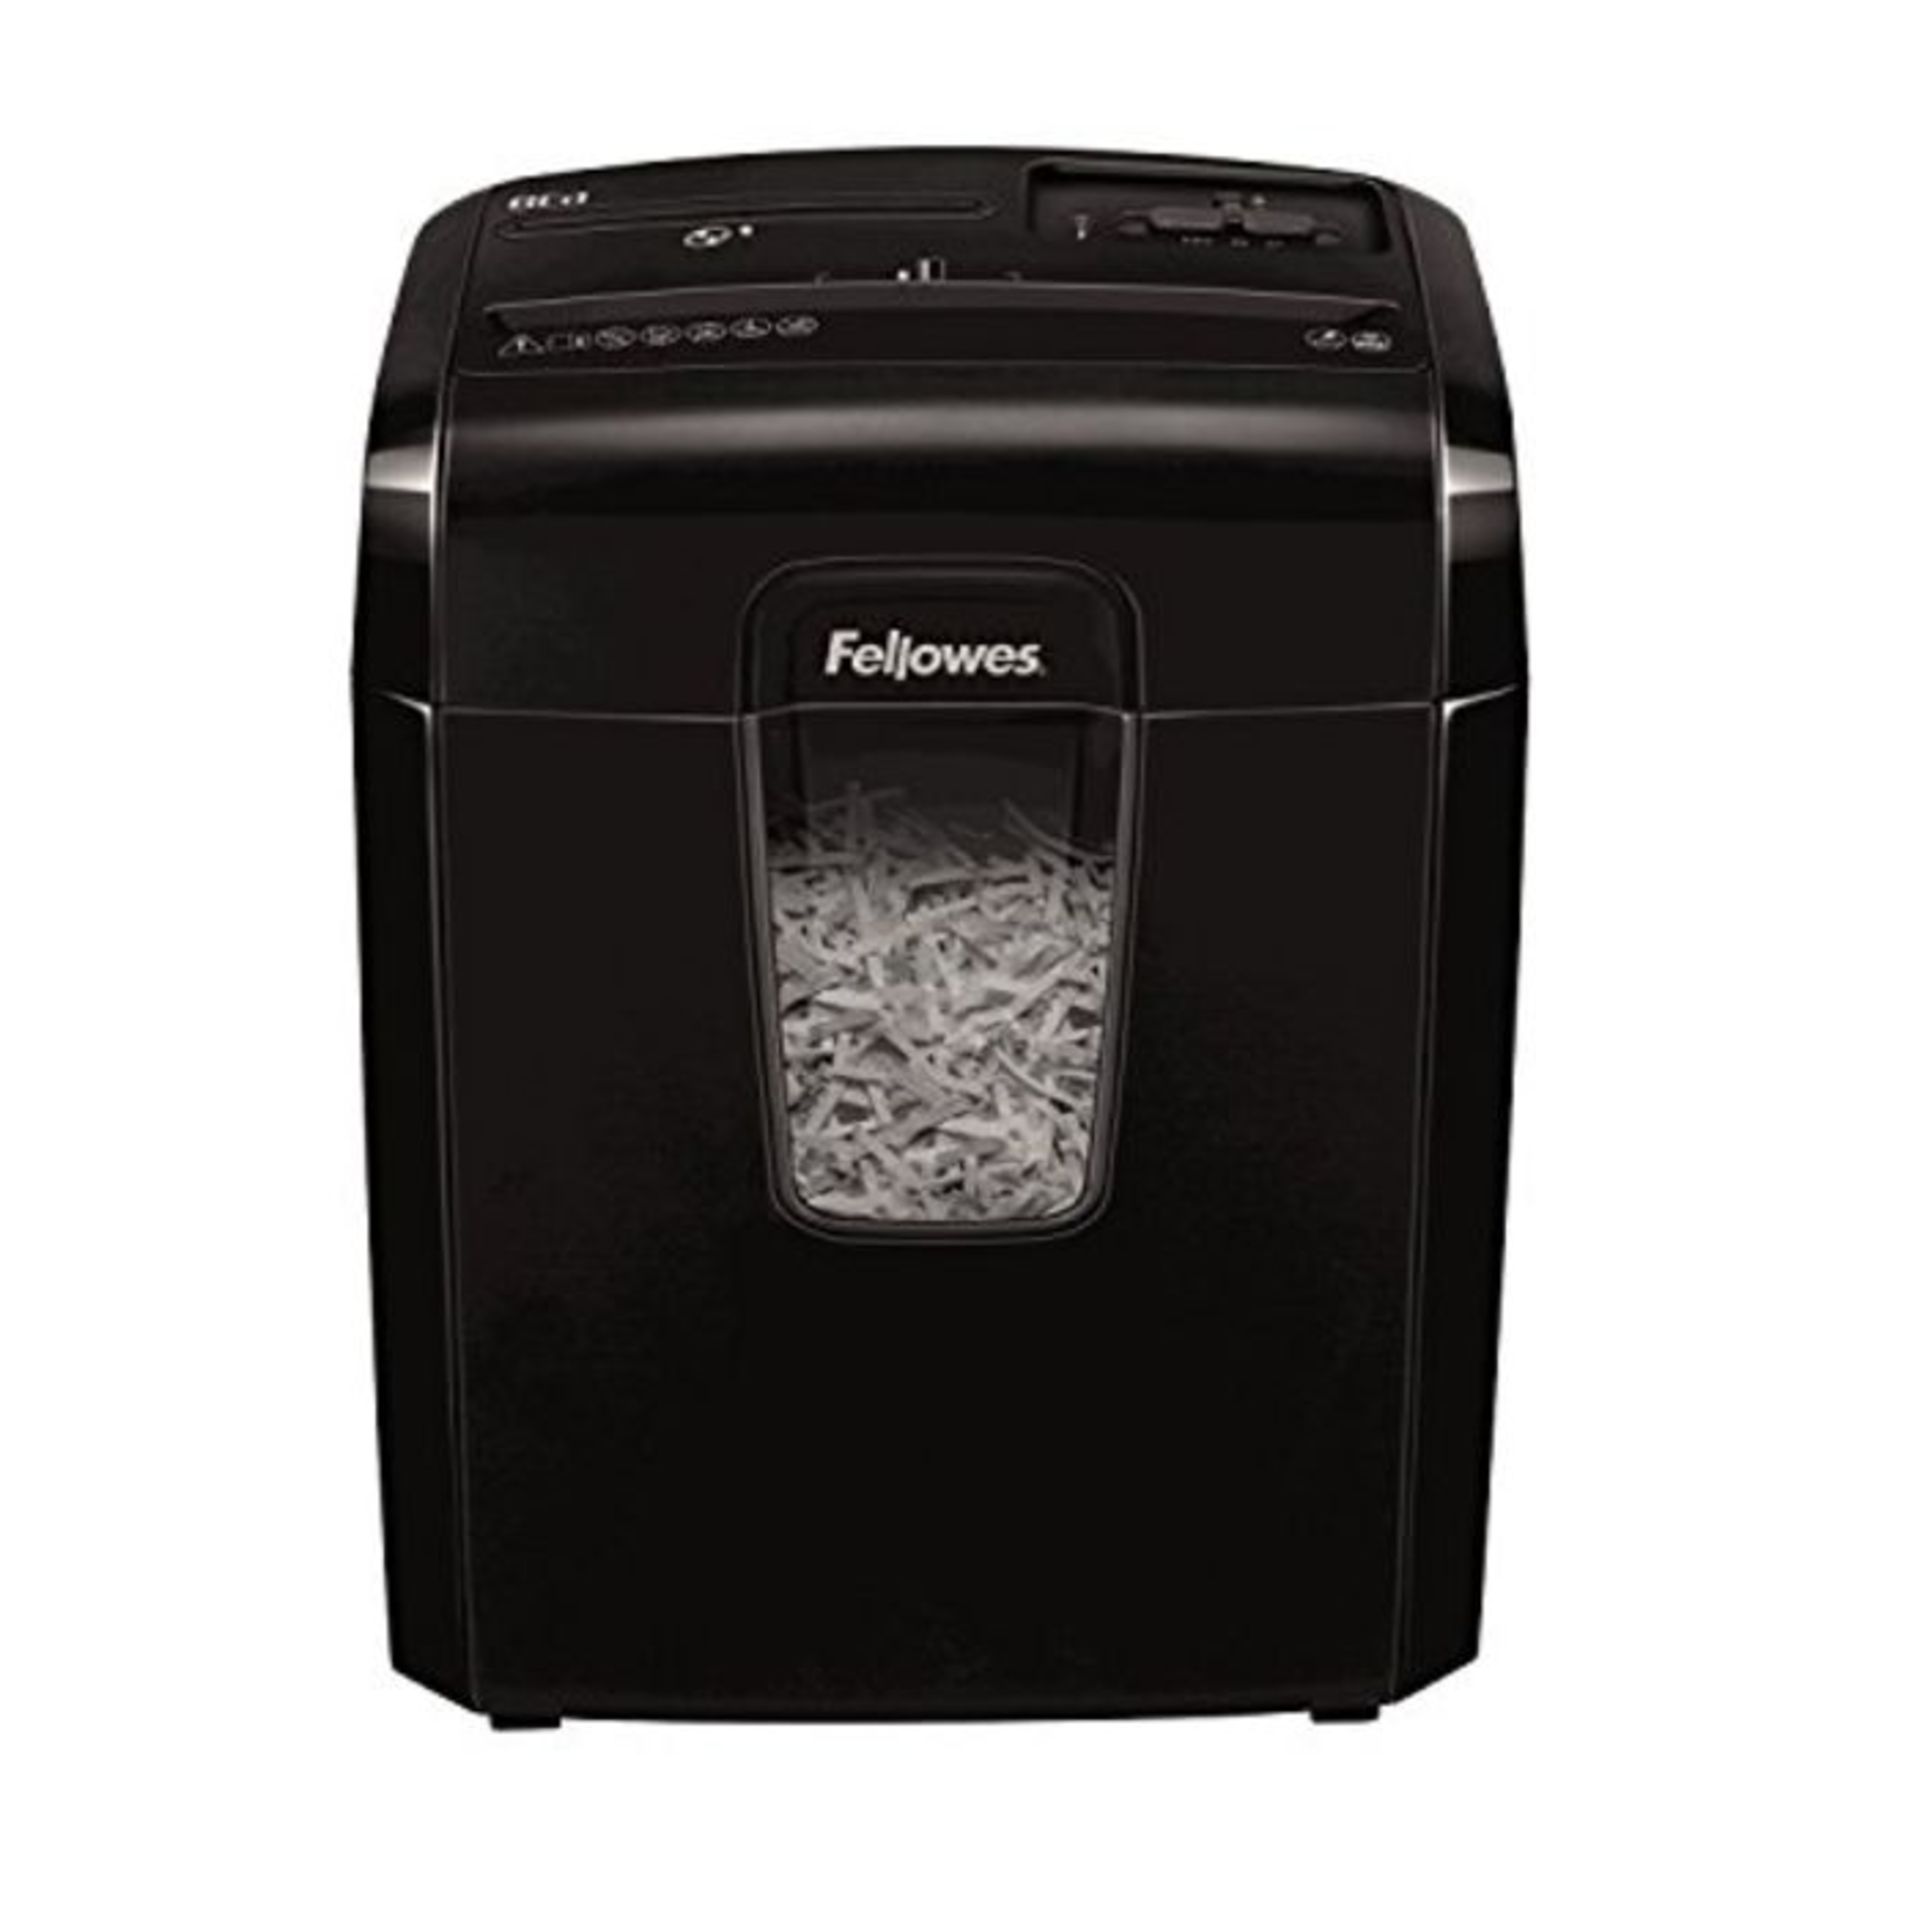 Fellowes Powershred 8Cd Personal 8 Sheet Cross Cut Paper Shredder for Home Use - with